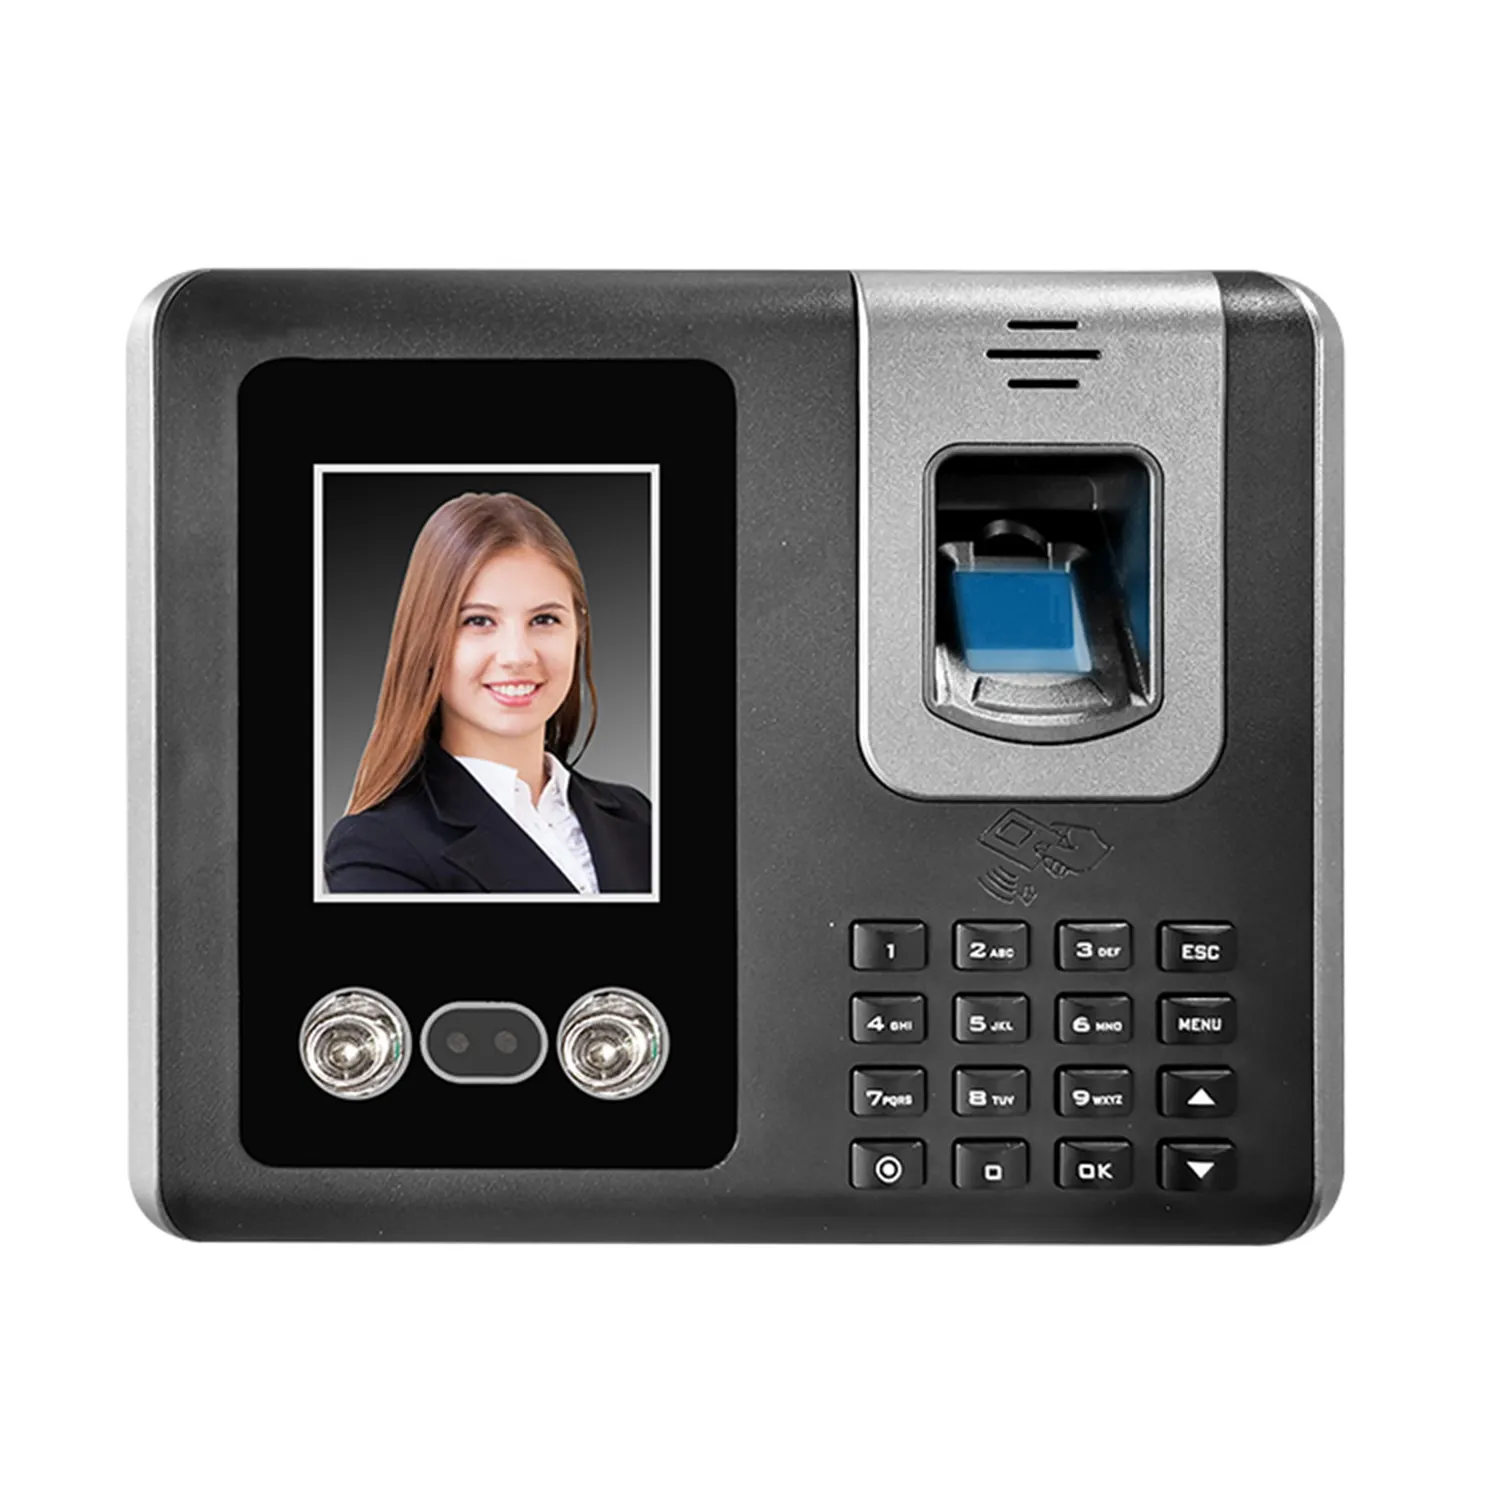 TIMMY Punch Time Clock Biometric Scanner Fingerprint Face Recognition And Finger Print Time Attendance